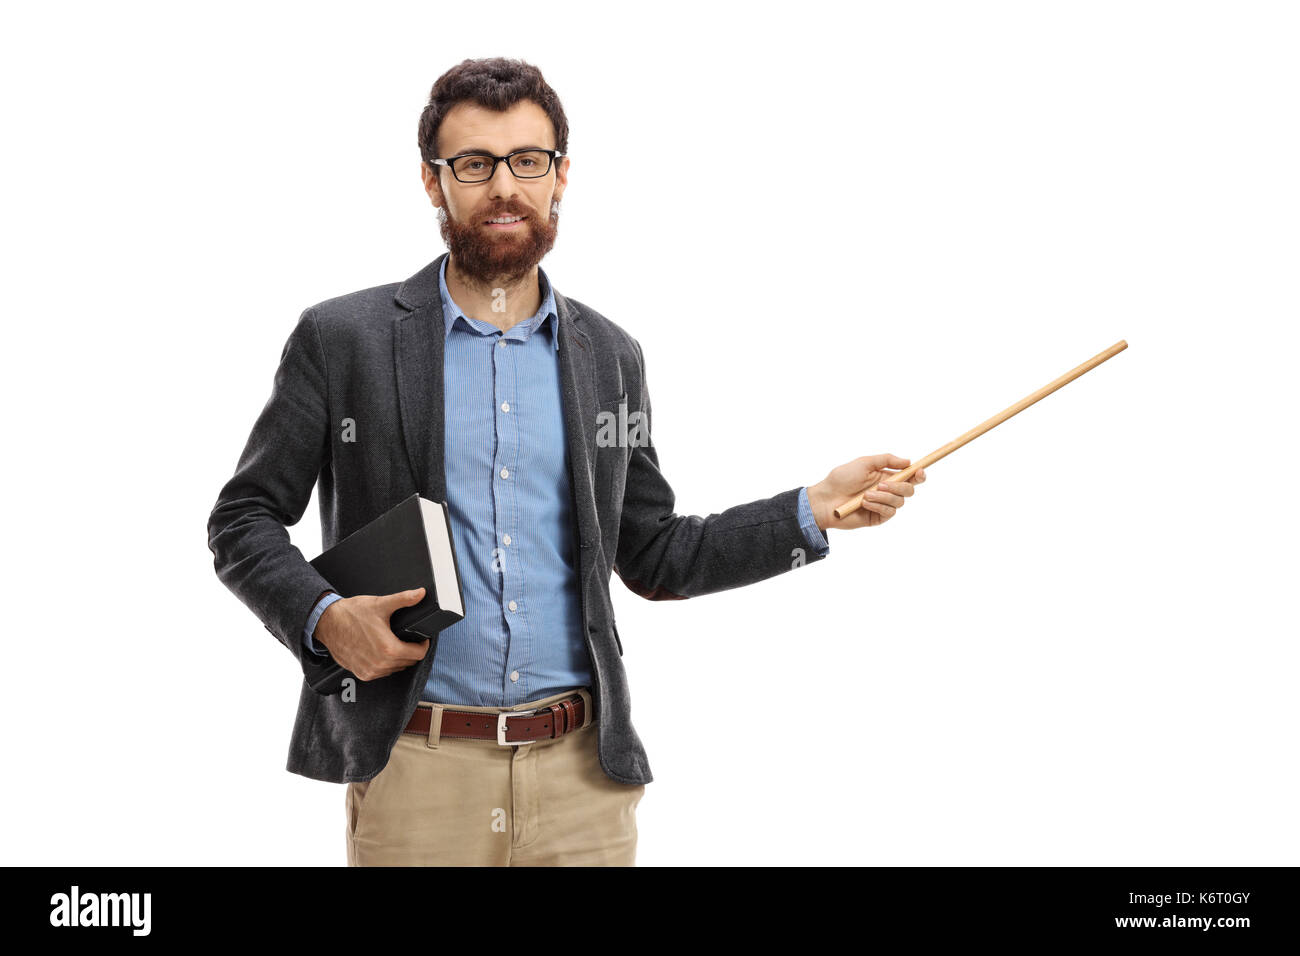 Teacher with a book and a wooden stick isolated on white background Stock Photo